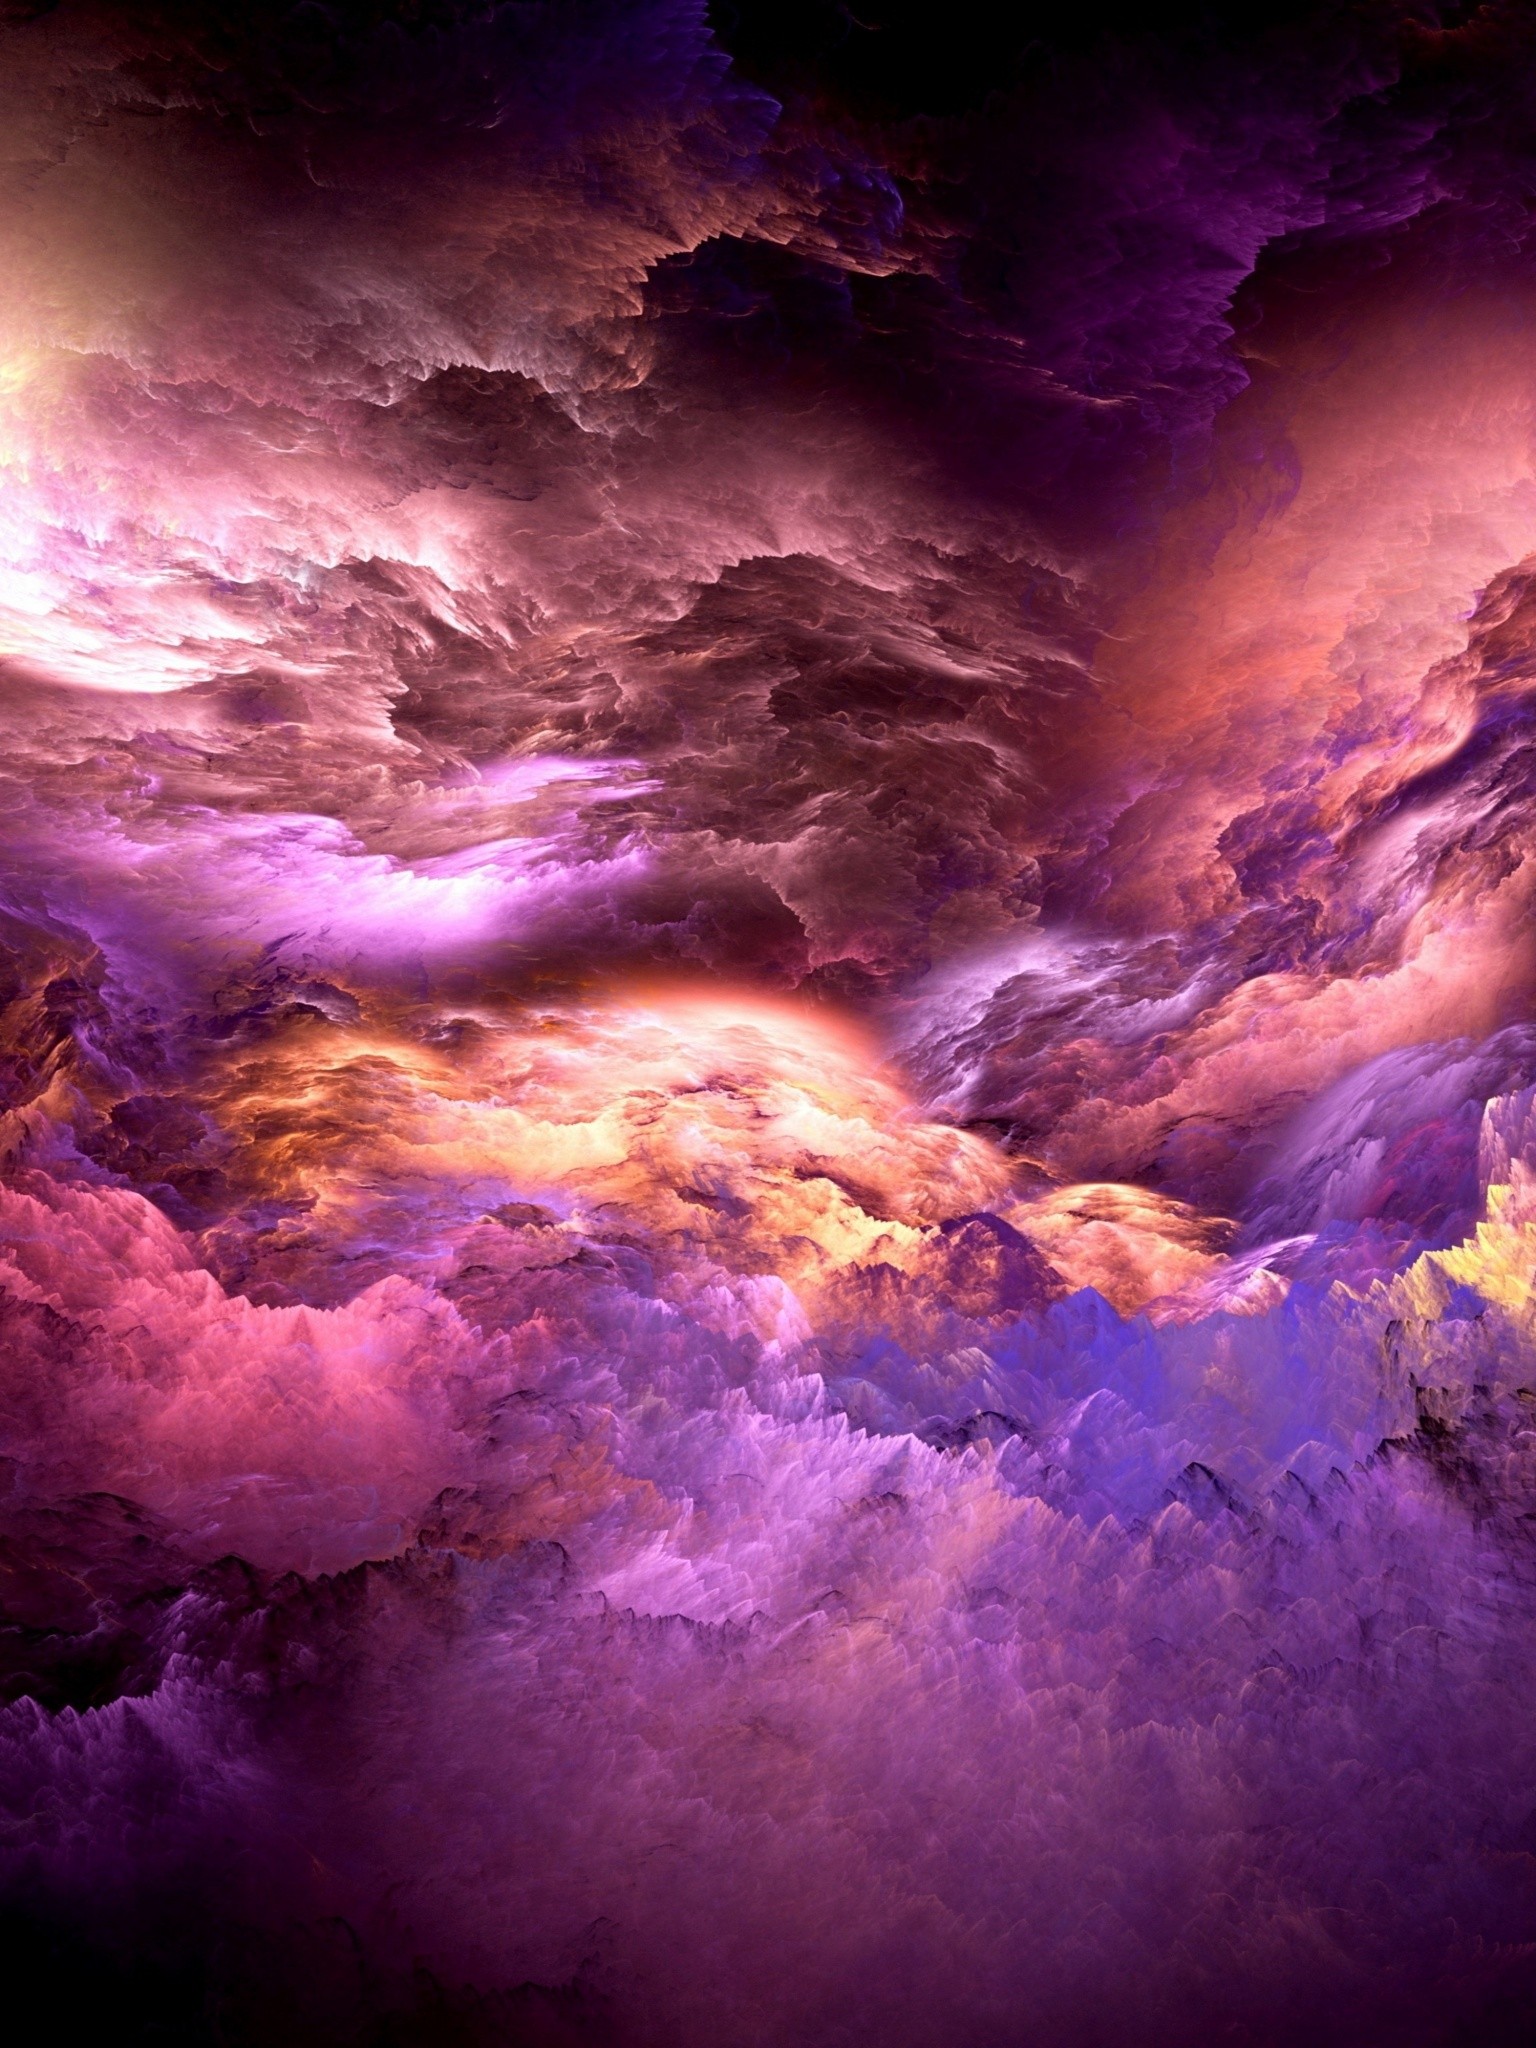 Abstract 3d Graphic Wallpaper - Iphone Colorful Clouds Background - HD Wallpaper 